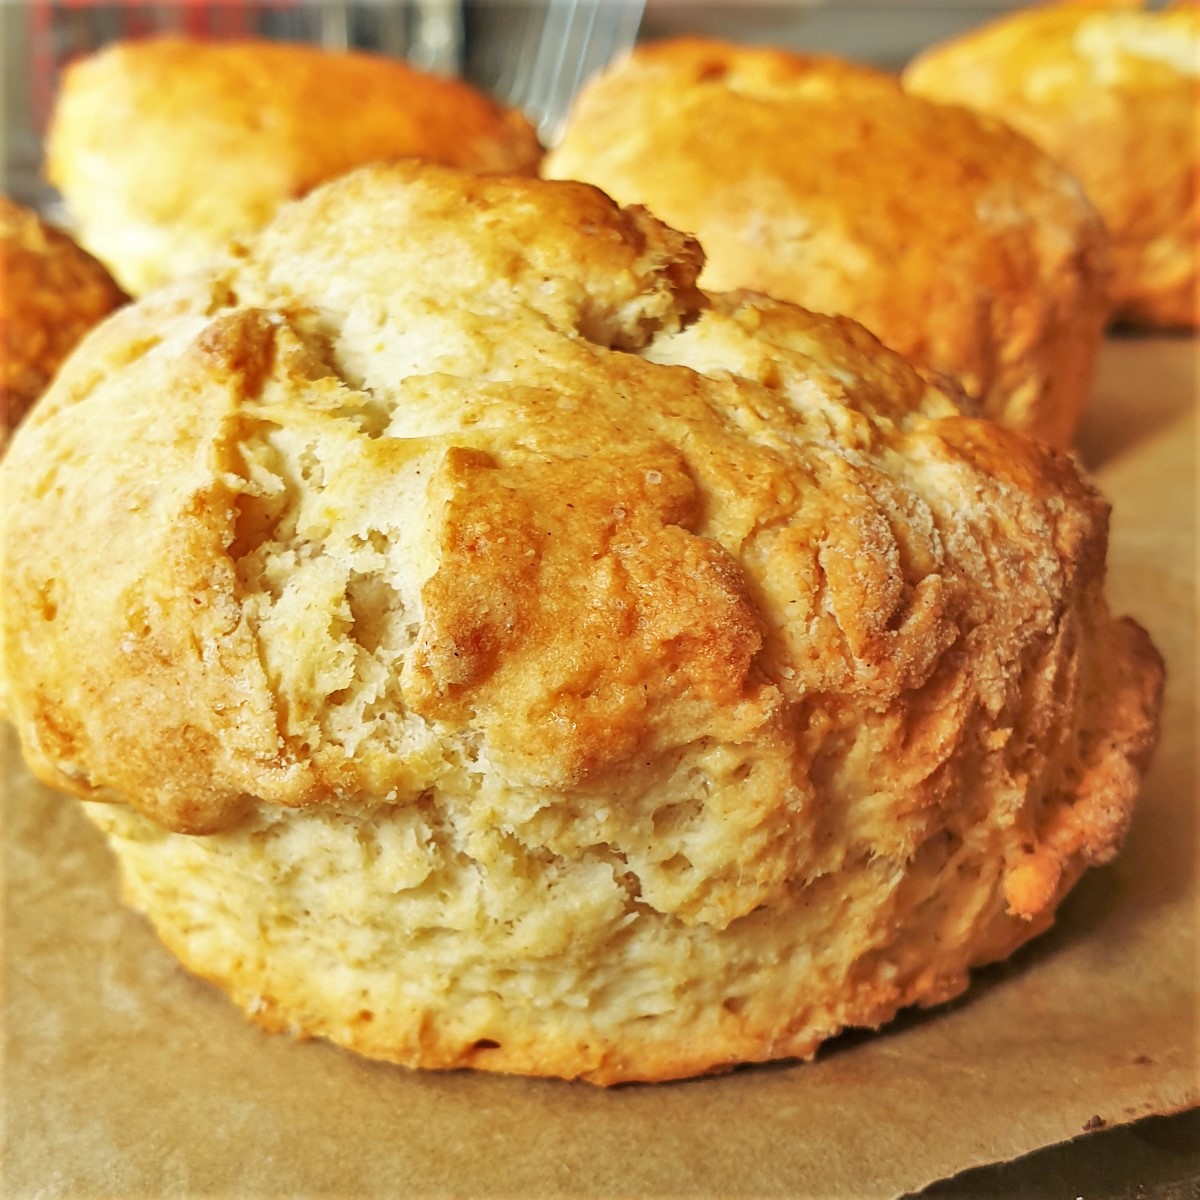 A scone fresh from the oven.